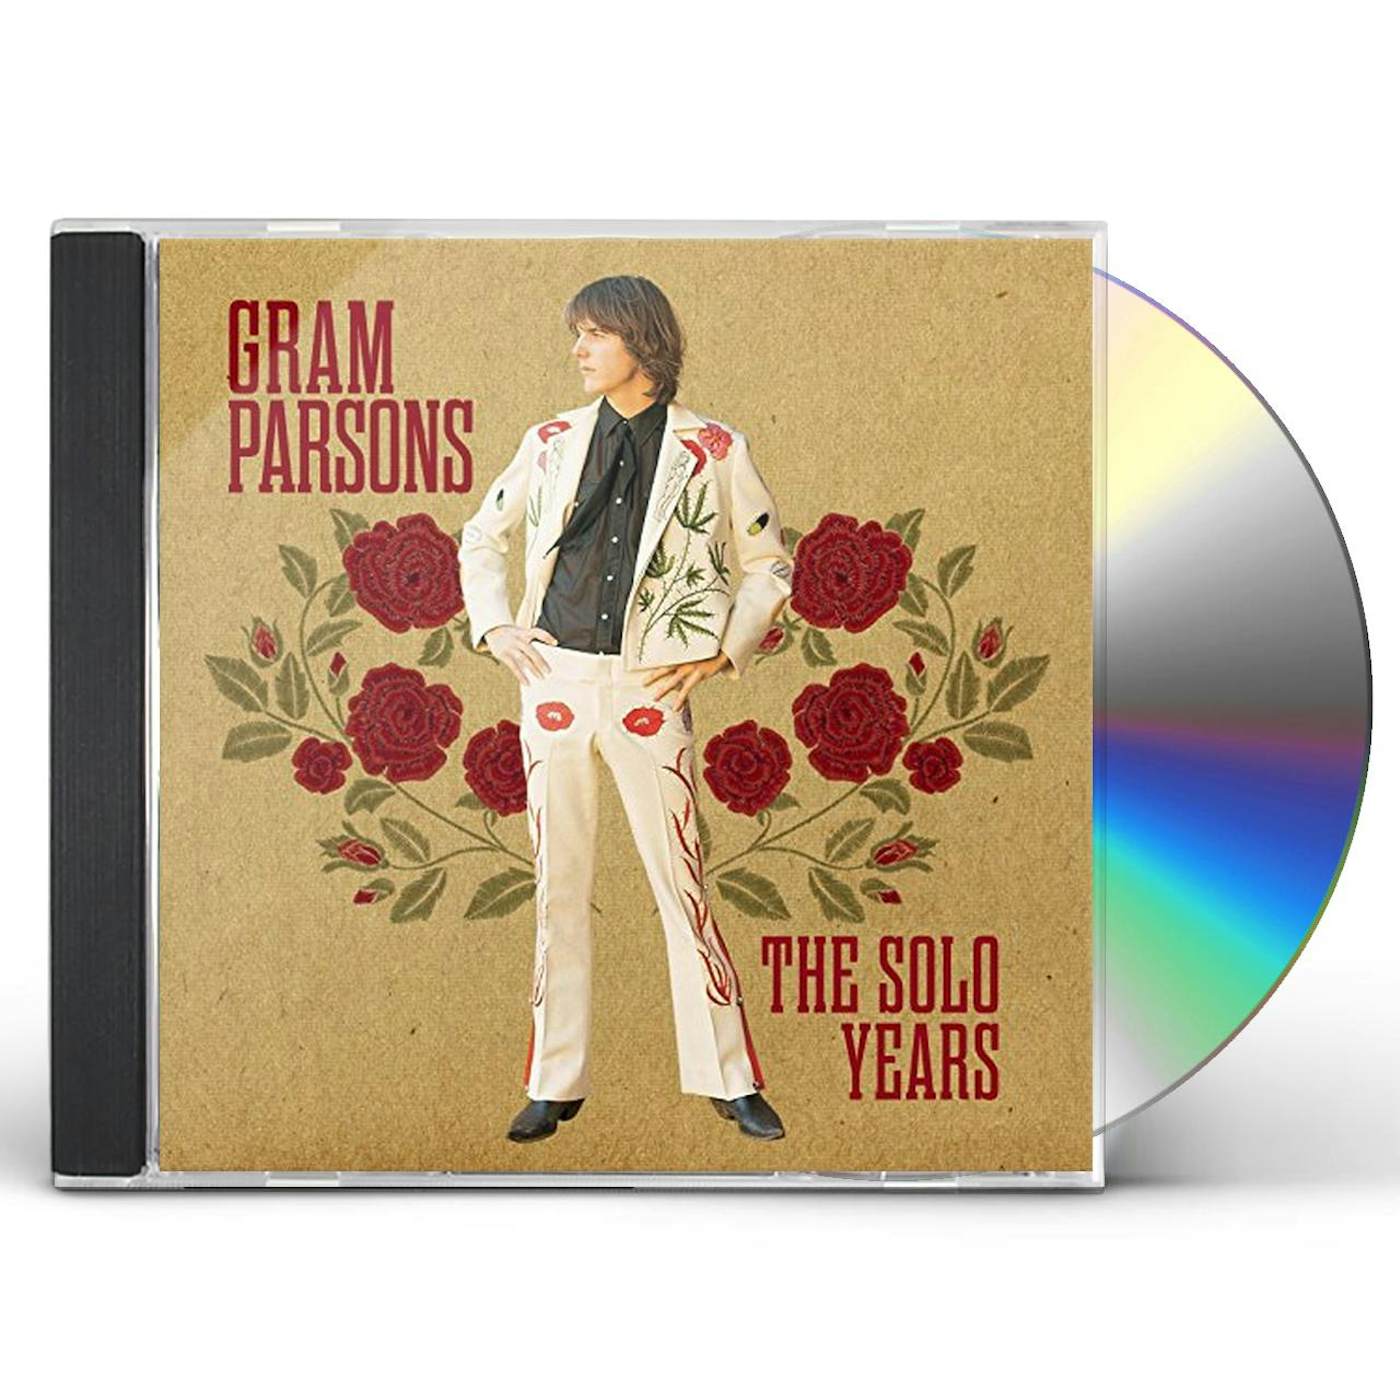 Gram Parsons SOLO YEARS CD